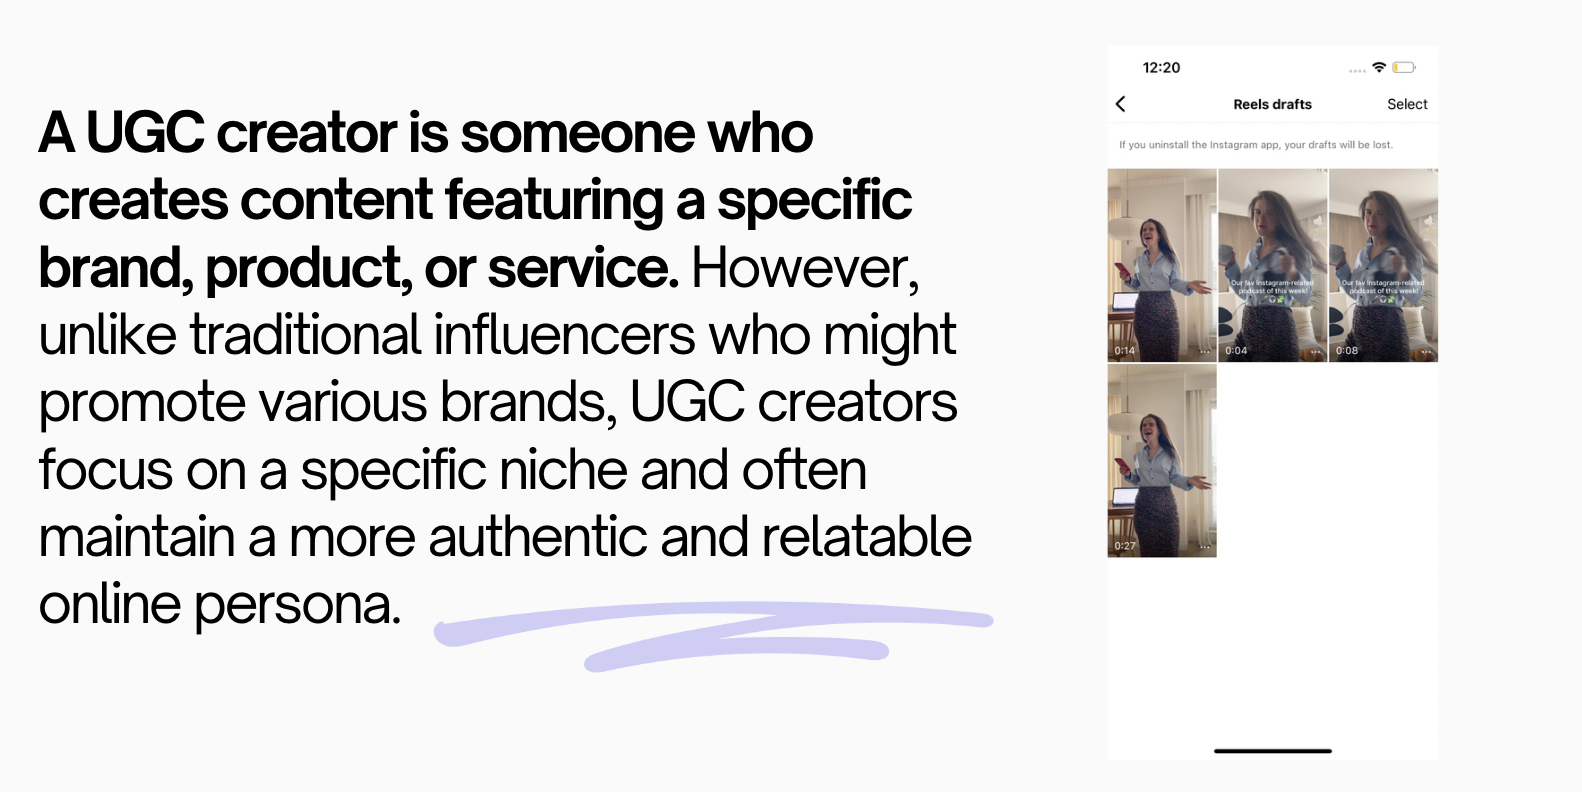 explanation of What is a UGC Creator